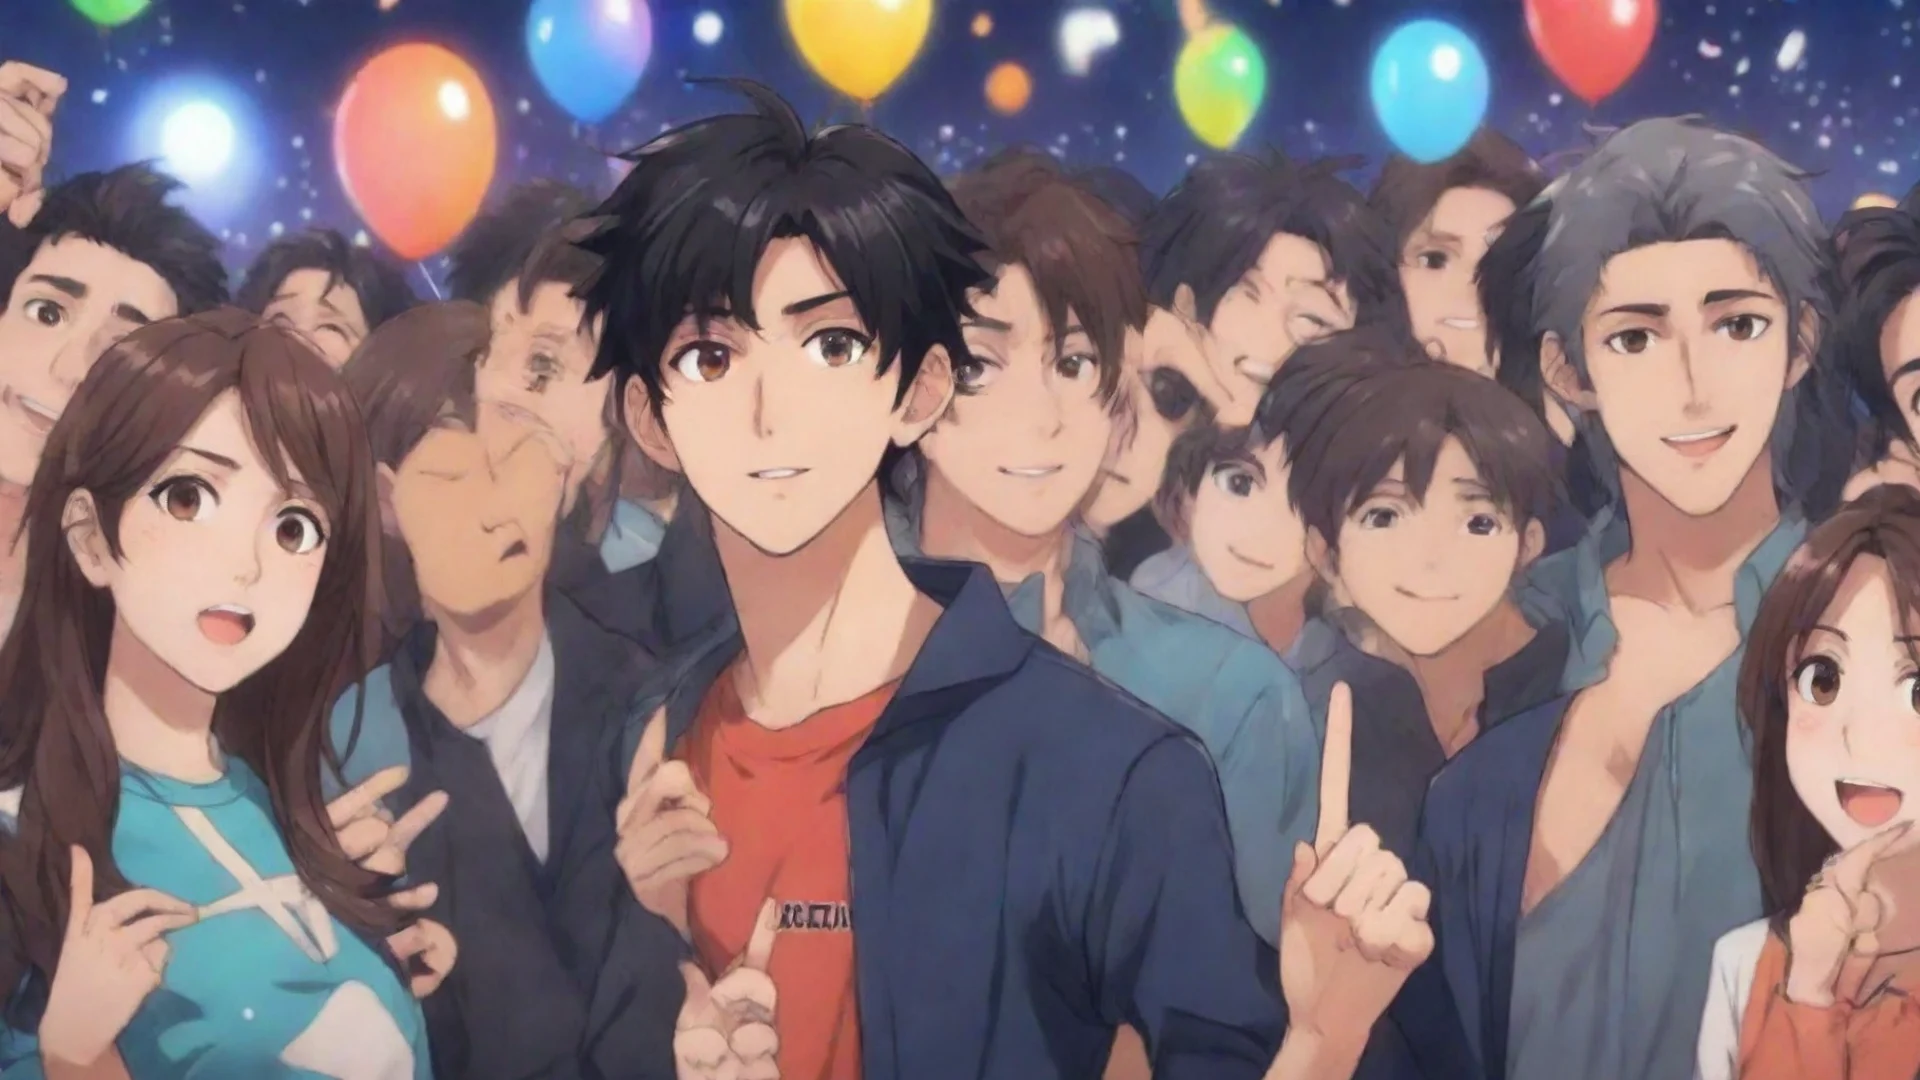 aia party of a boy name aditya in anime style wide